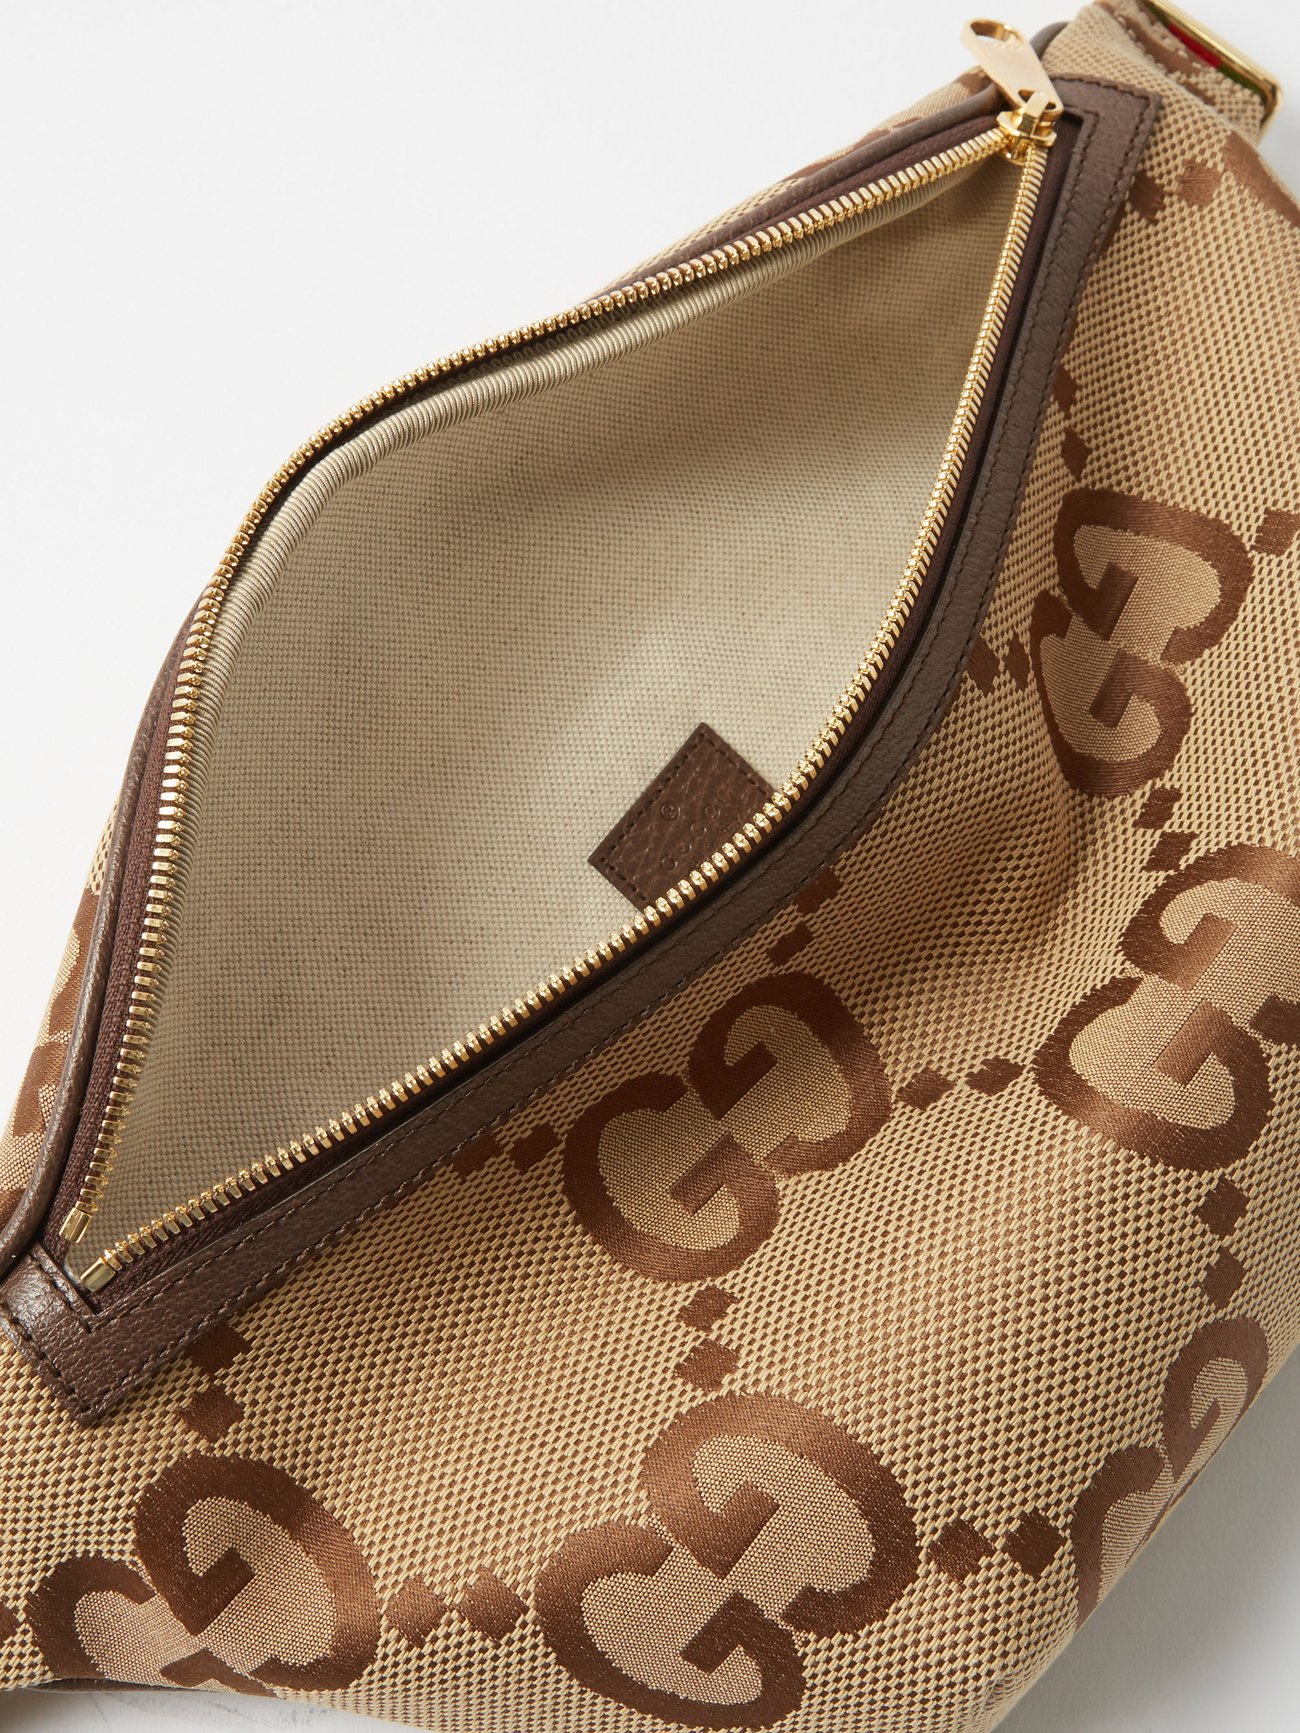 Jumbo GG belt bag in taupe leather